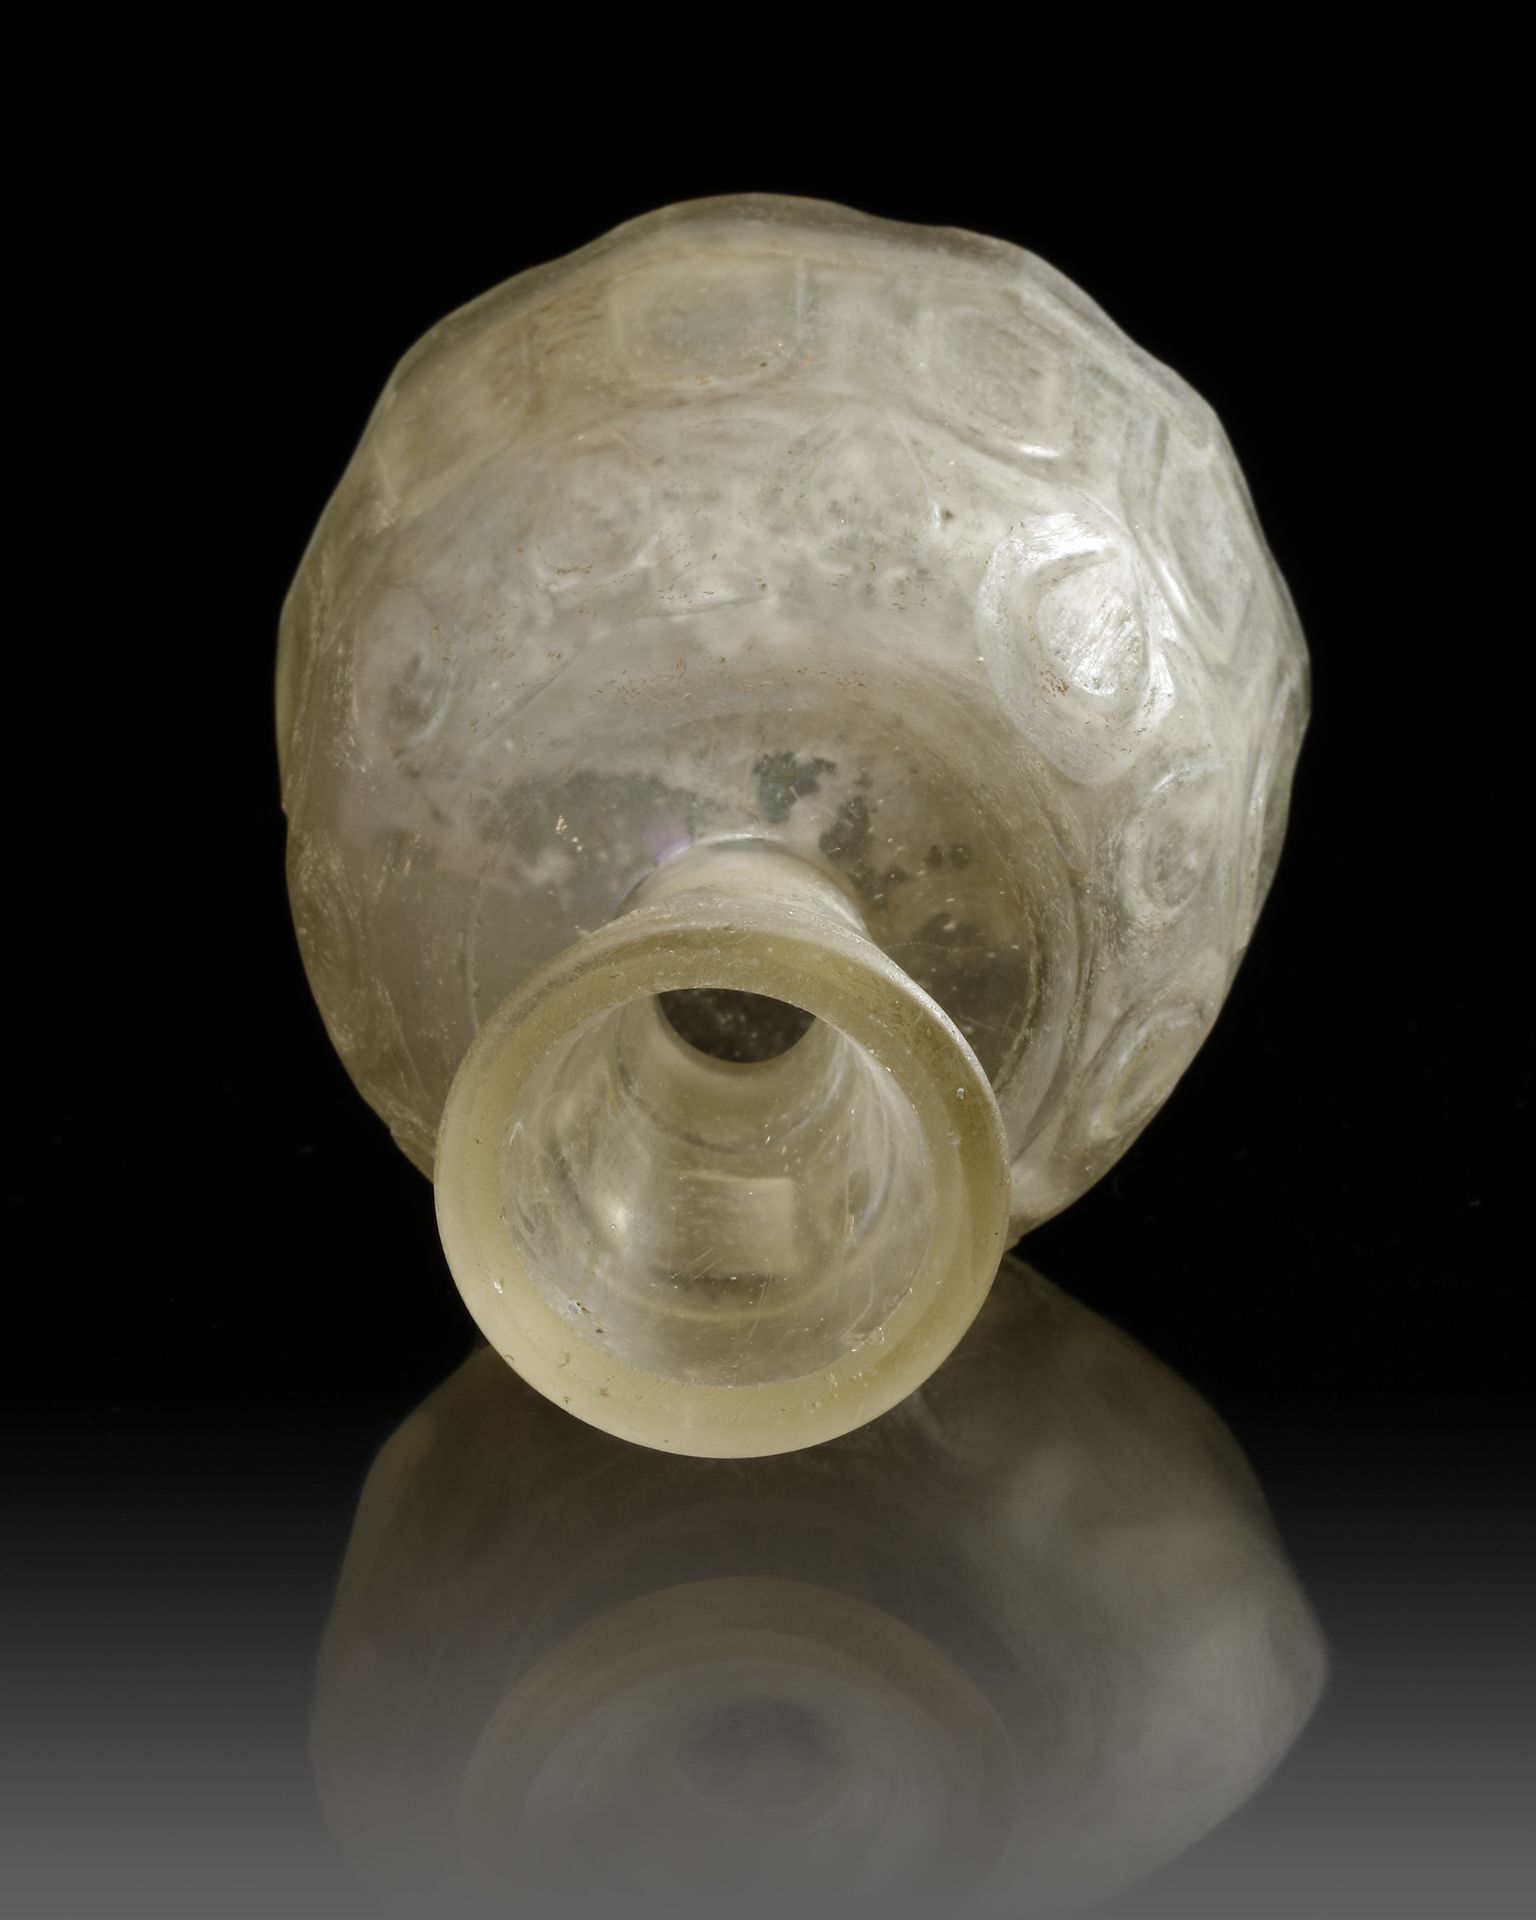 A WHEEL-CUT CLEAR GLASS BOTTLE NORTH EAST PERSIA, 9TH-10TH CENTURY - Image 8 of 9